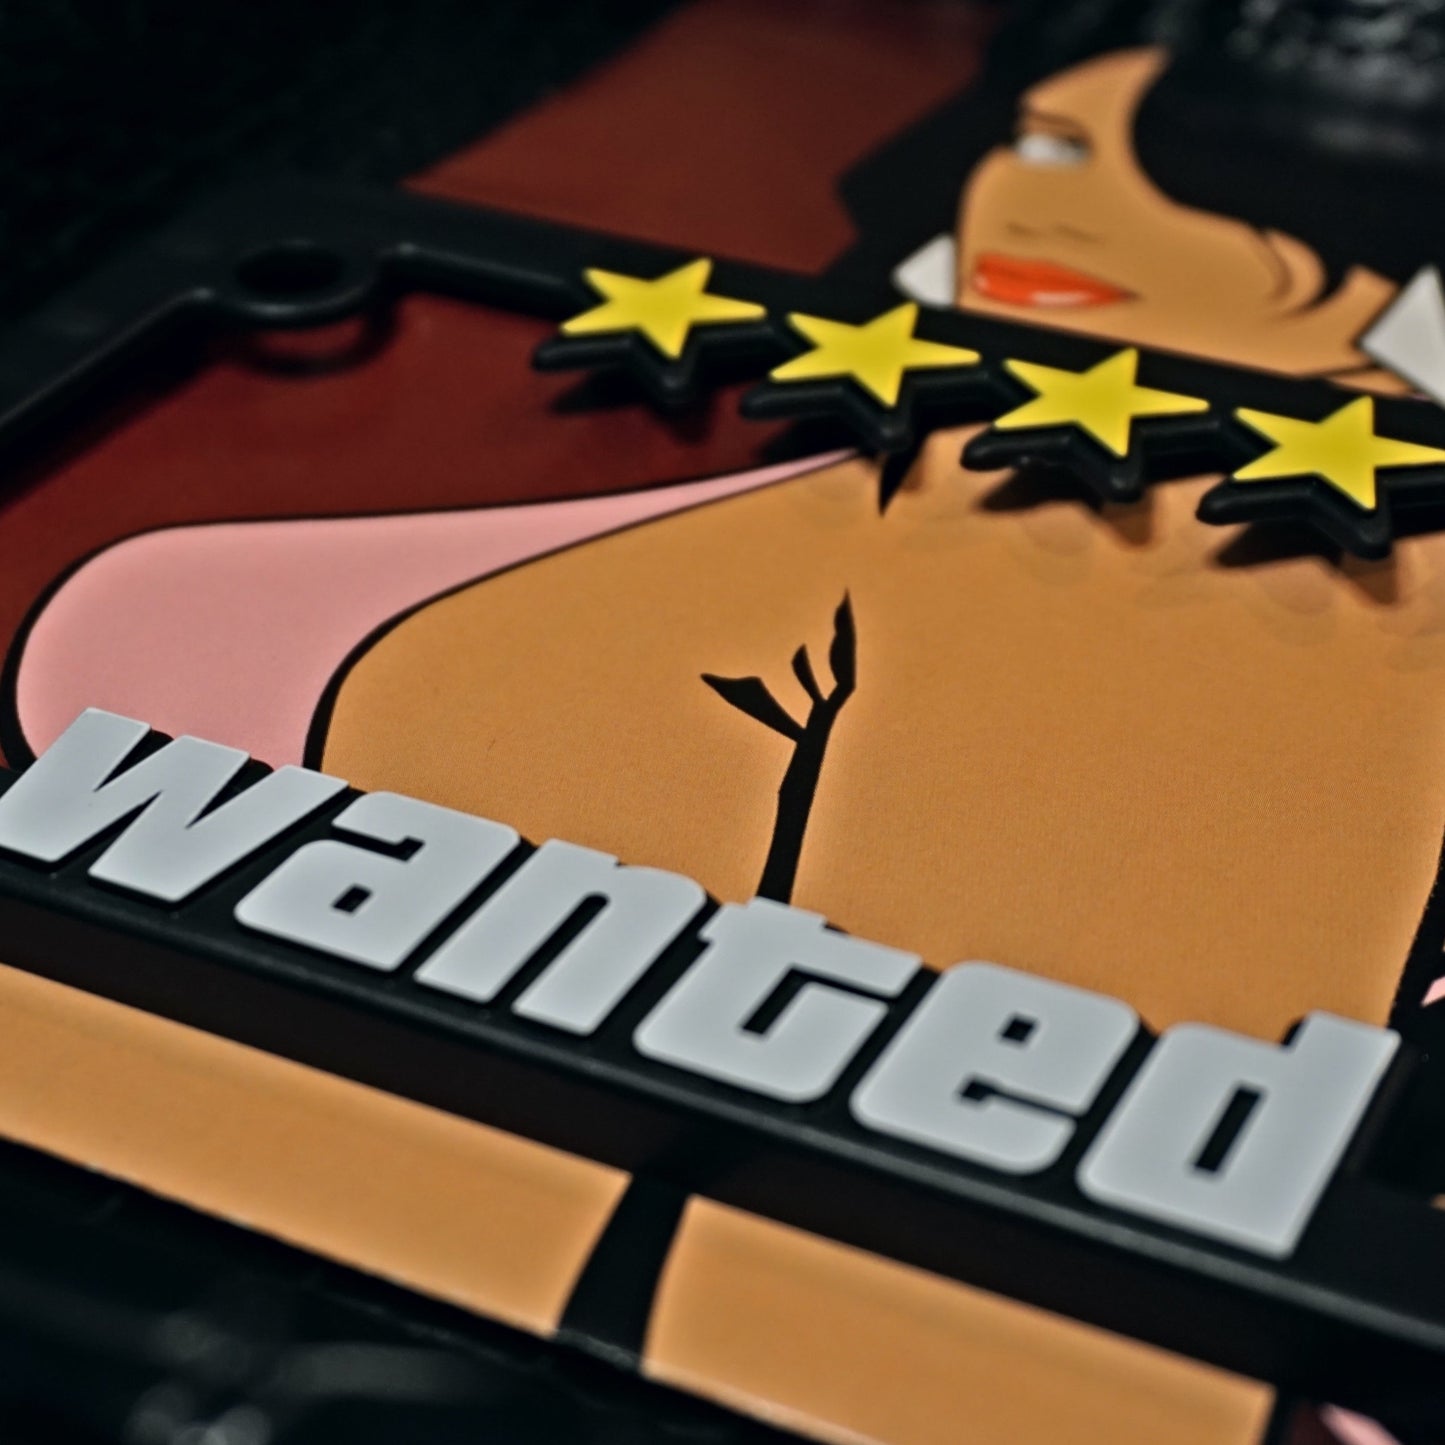 GTA Wanted Level Motorcycle License Plate Frame, 5 Stars